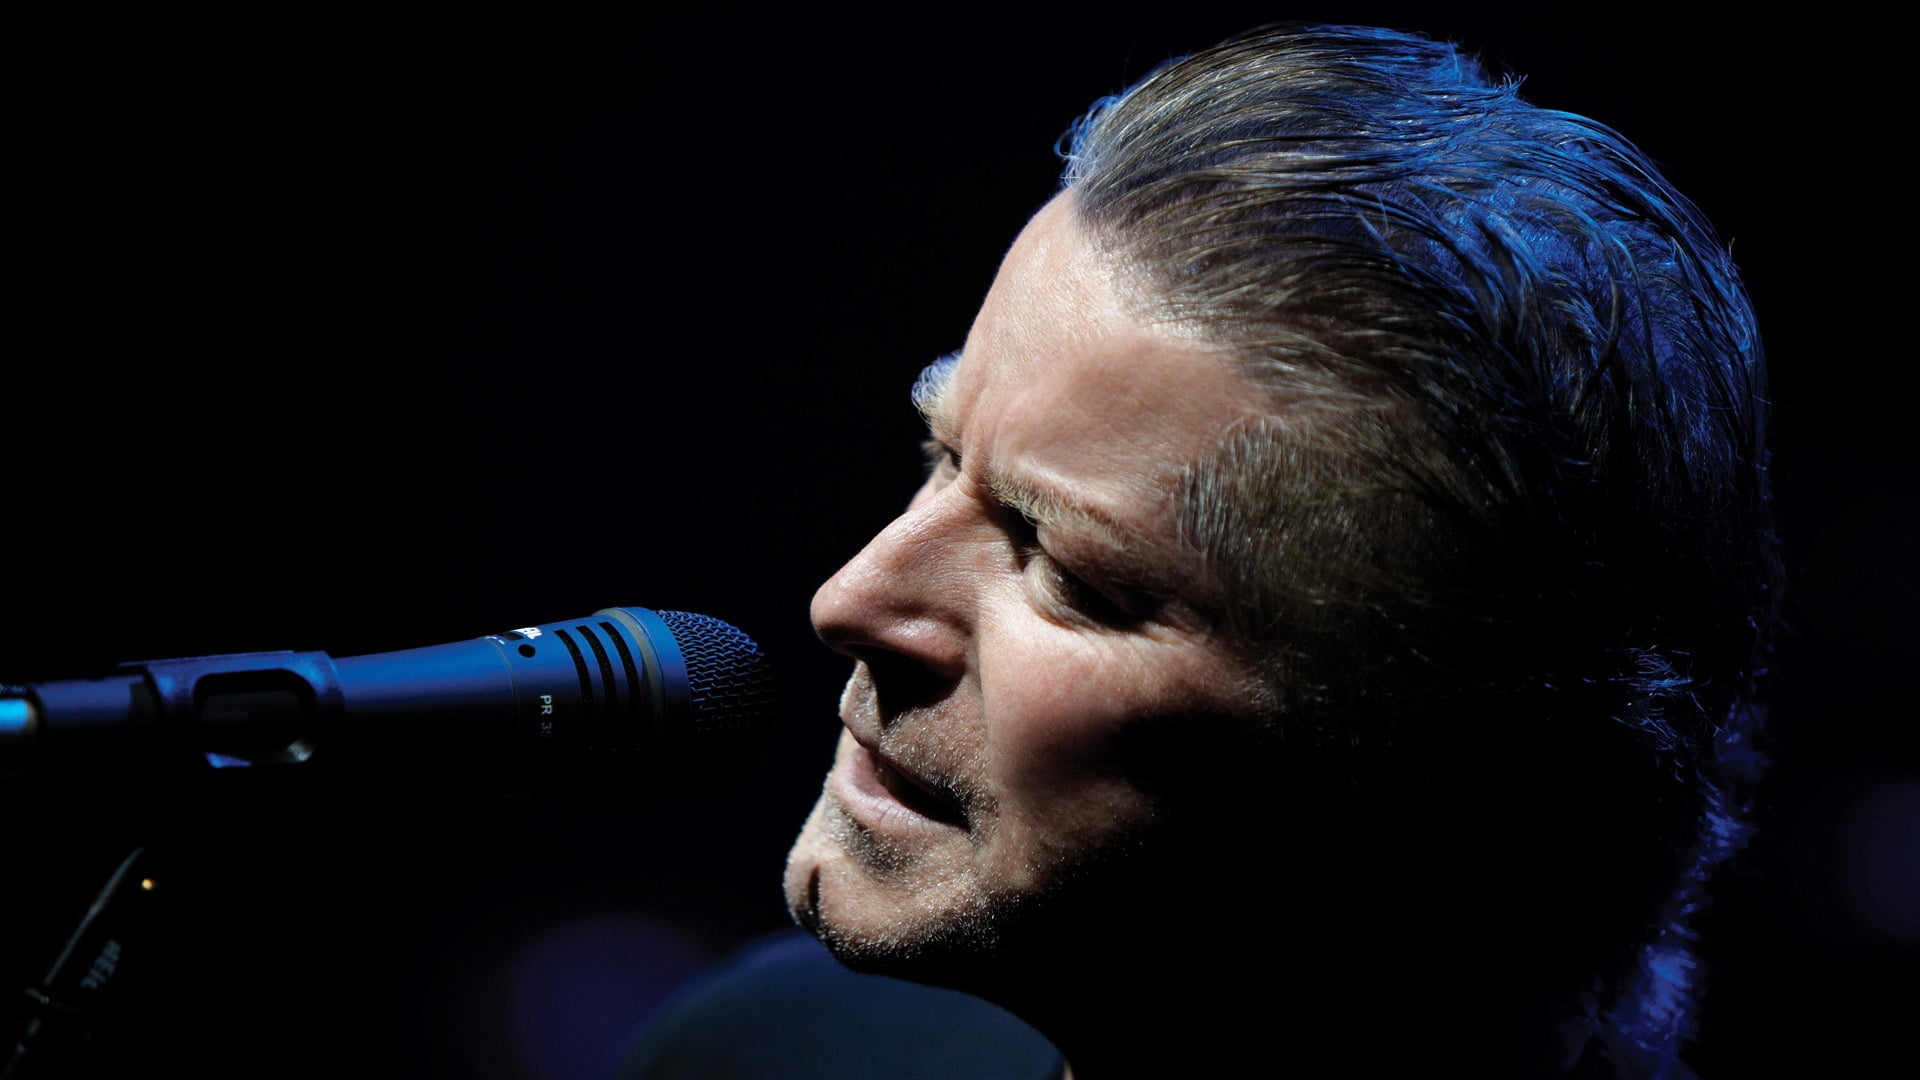 man's face and black microphone, don henley, light, haircut, singer